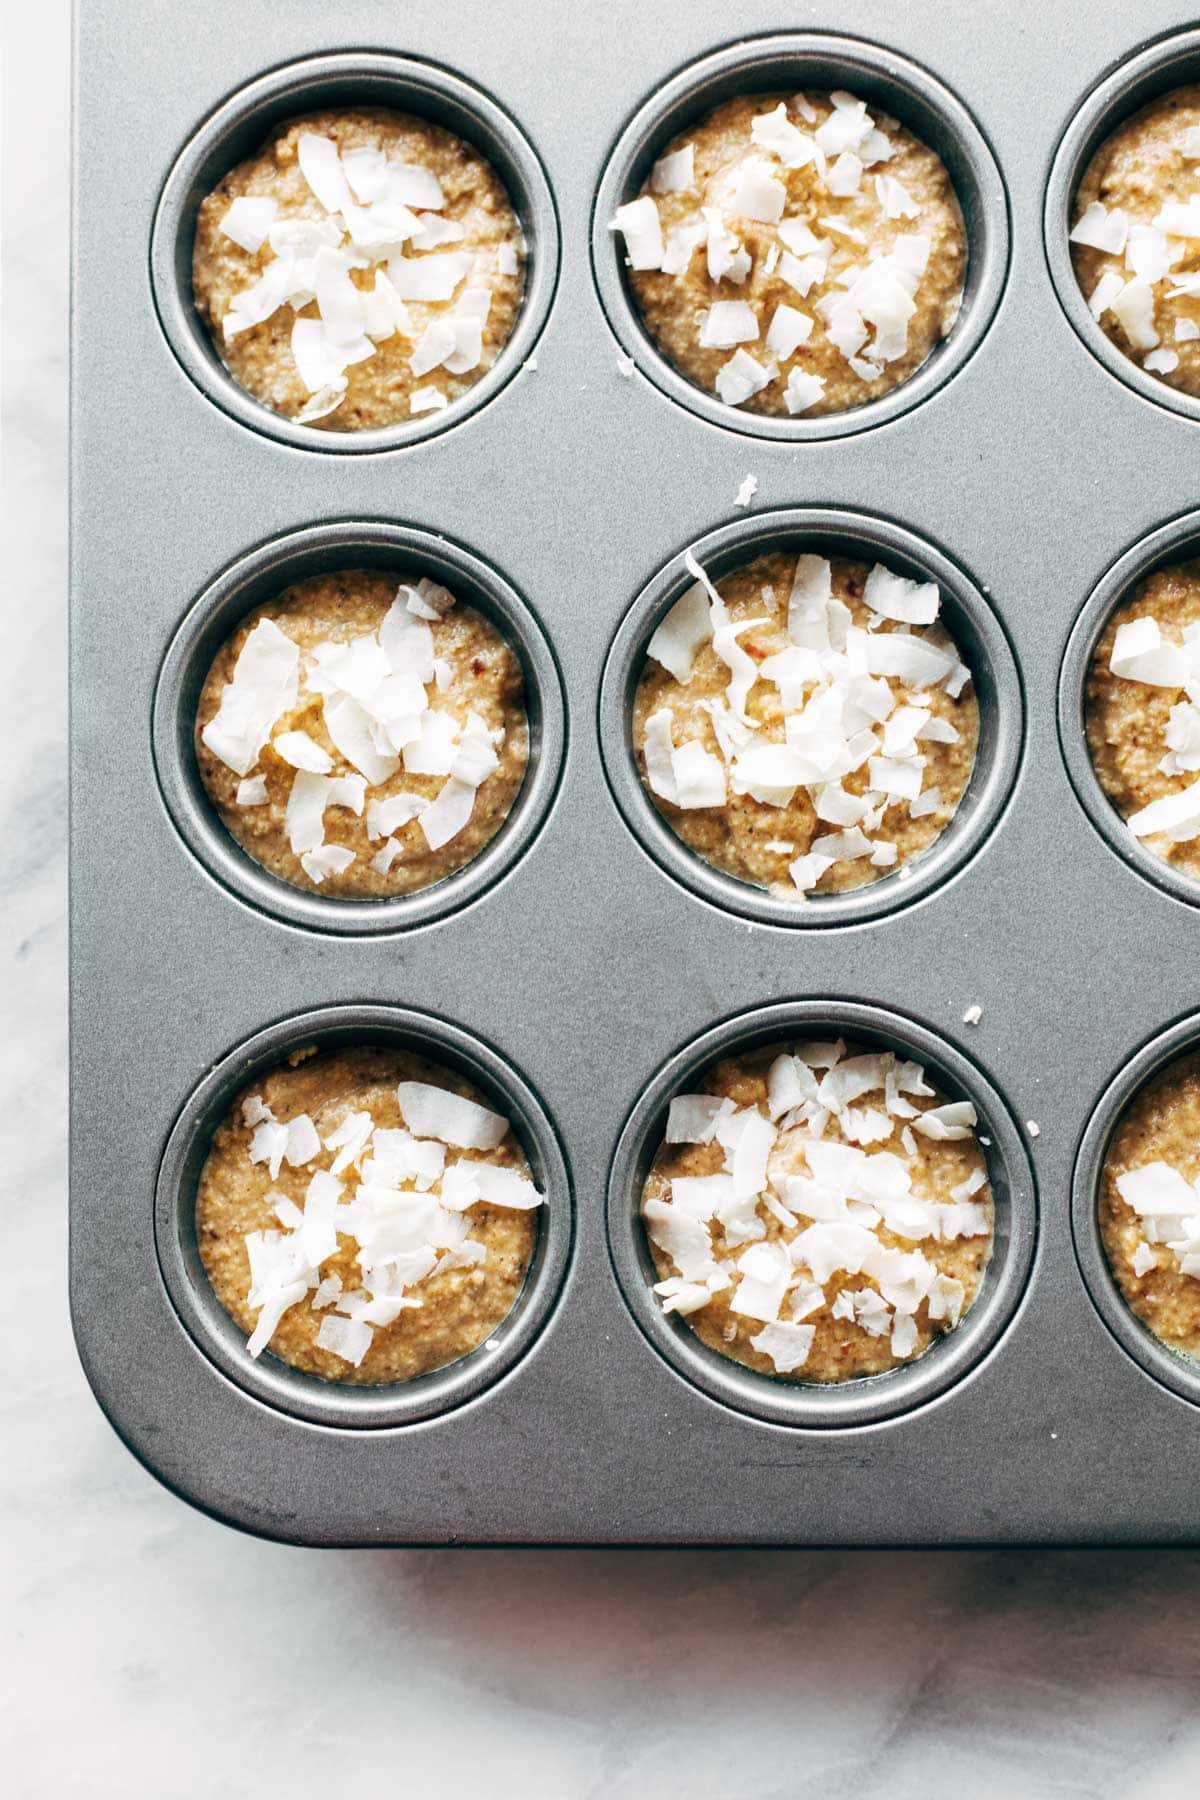 Apple muffins in a muffin tin before baking.